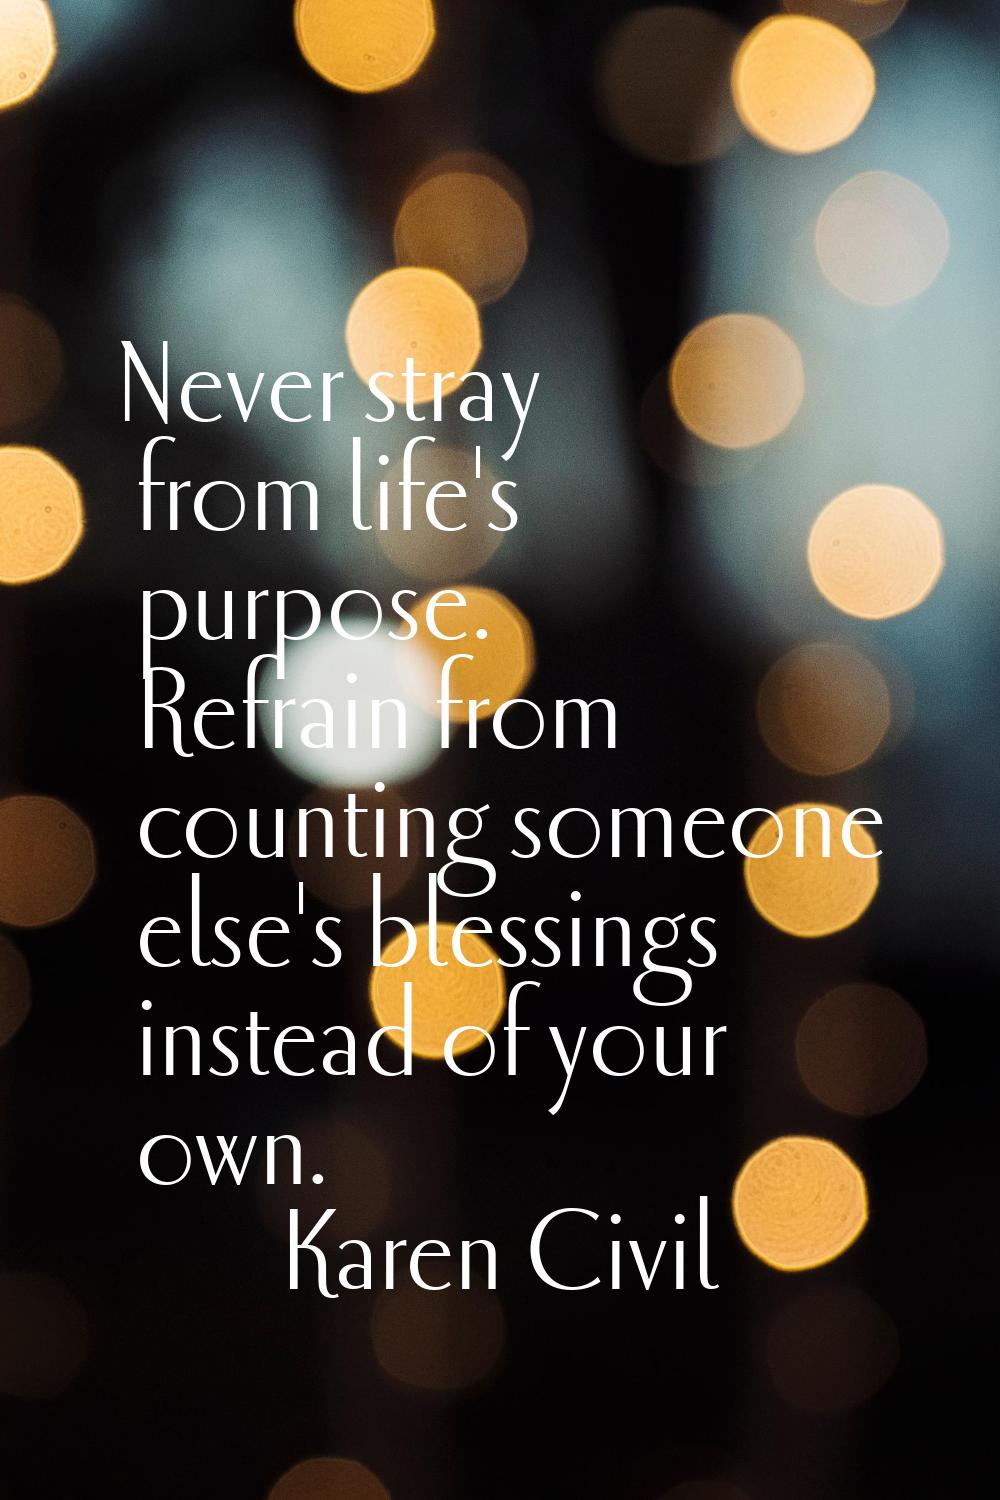 Never stray from life's purpose. Refrain from counting someone else's blessings instead of your own